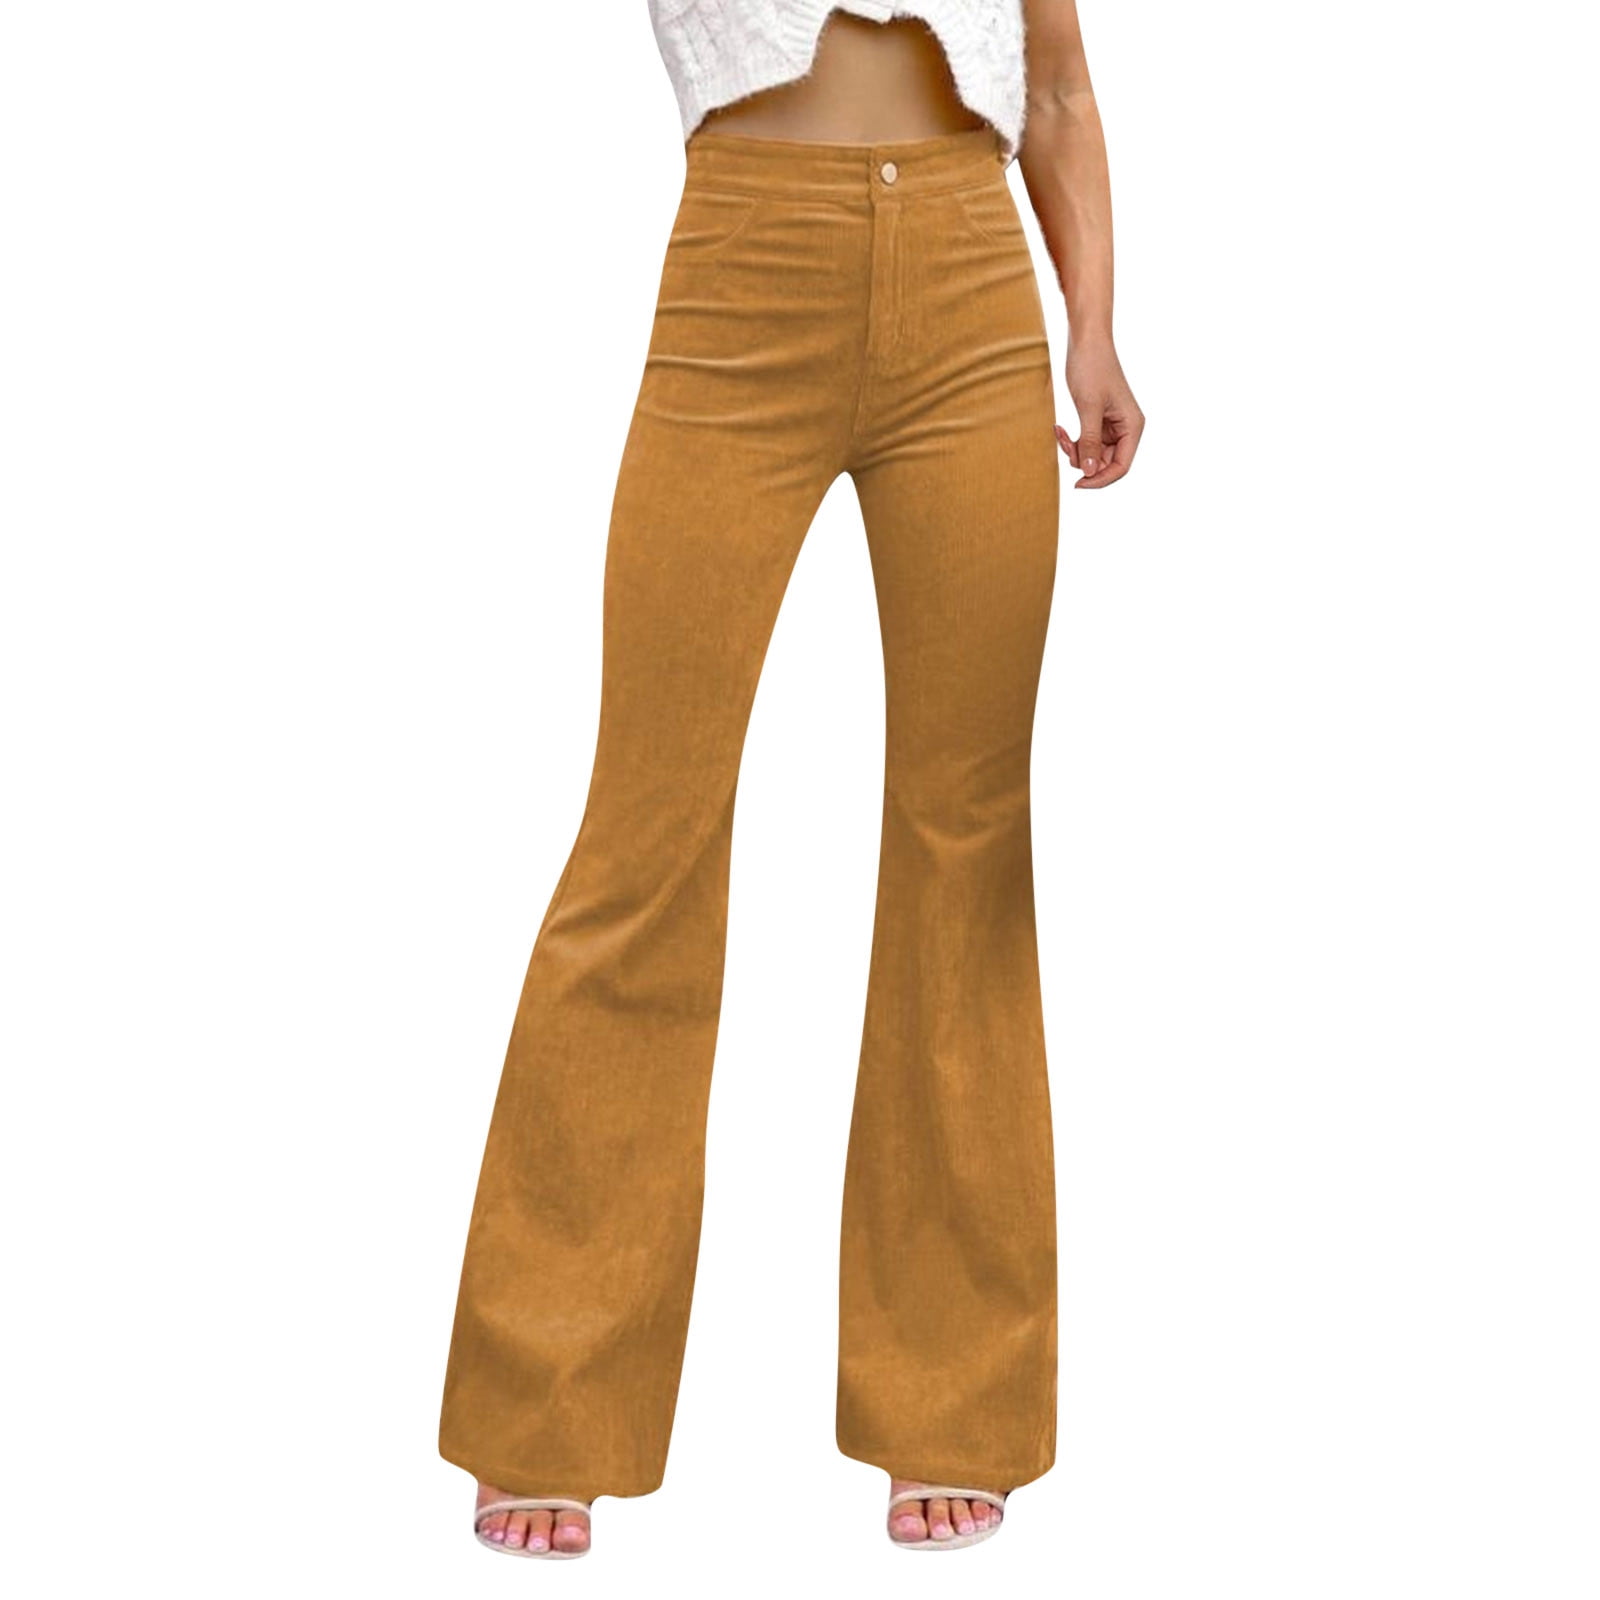 ODIZLI Women Corduroy Flare Pants Elastic Waist Bell Bottom Trousers Solid  Color with Pockets